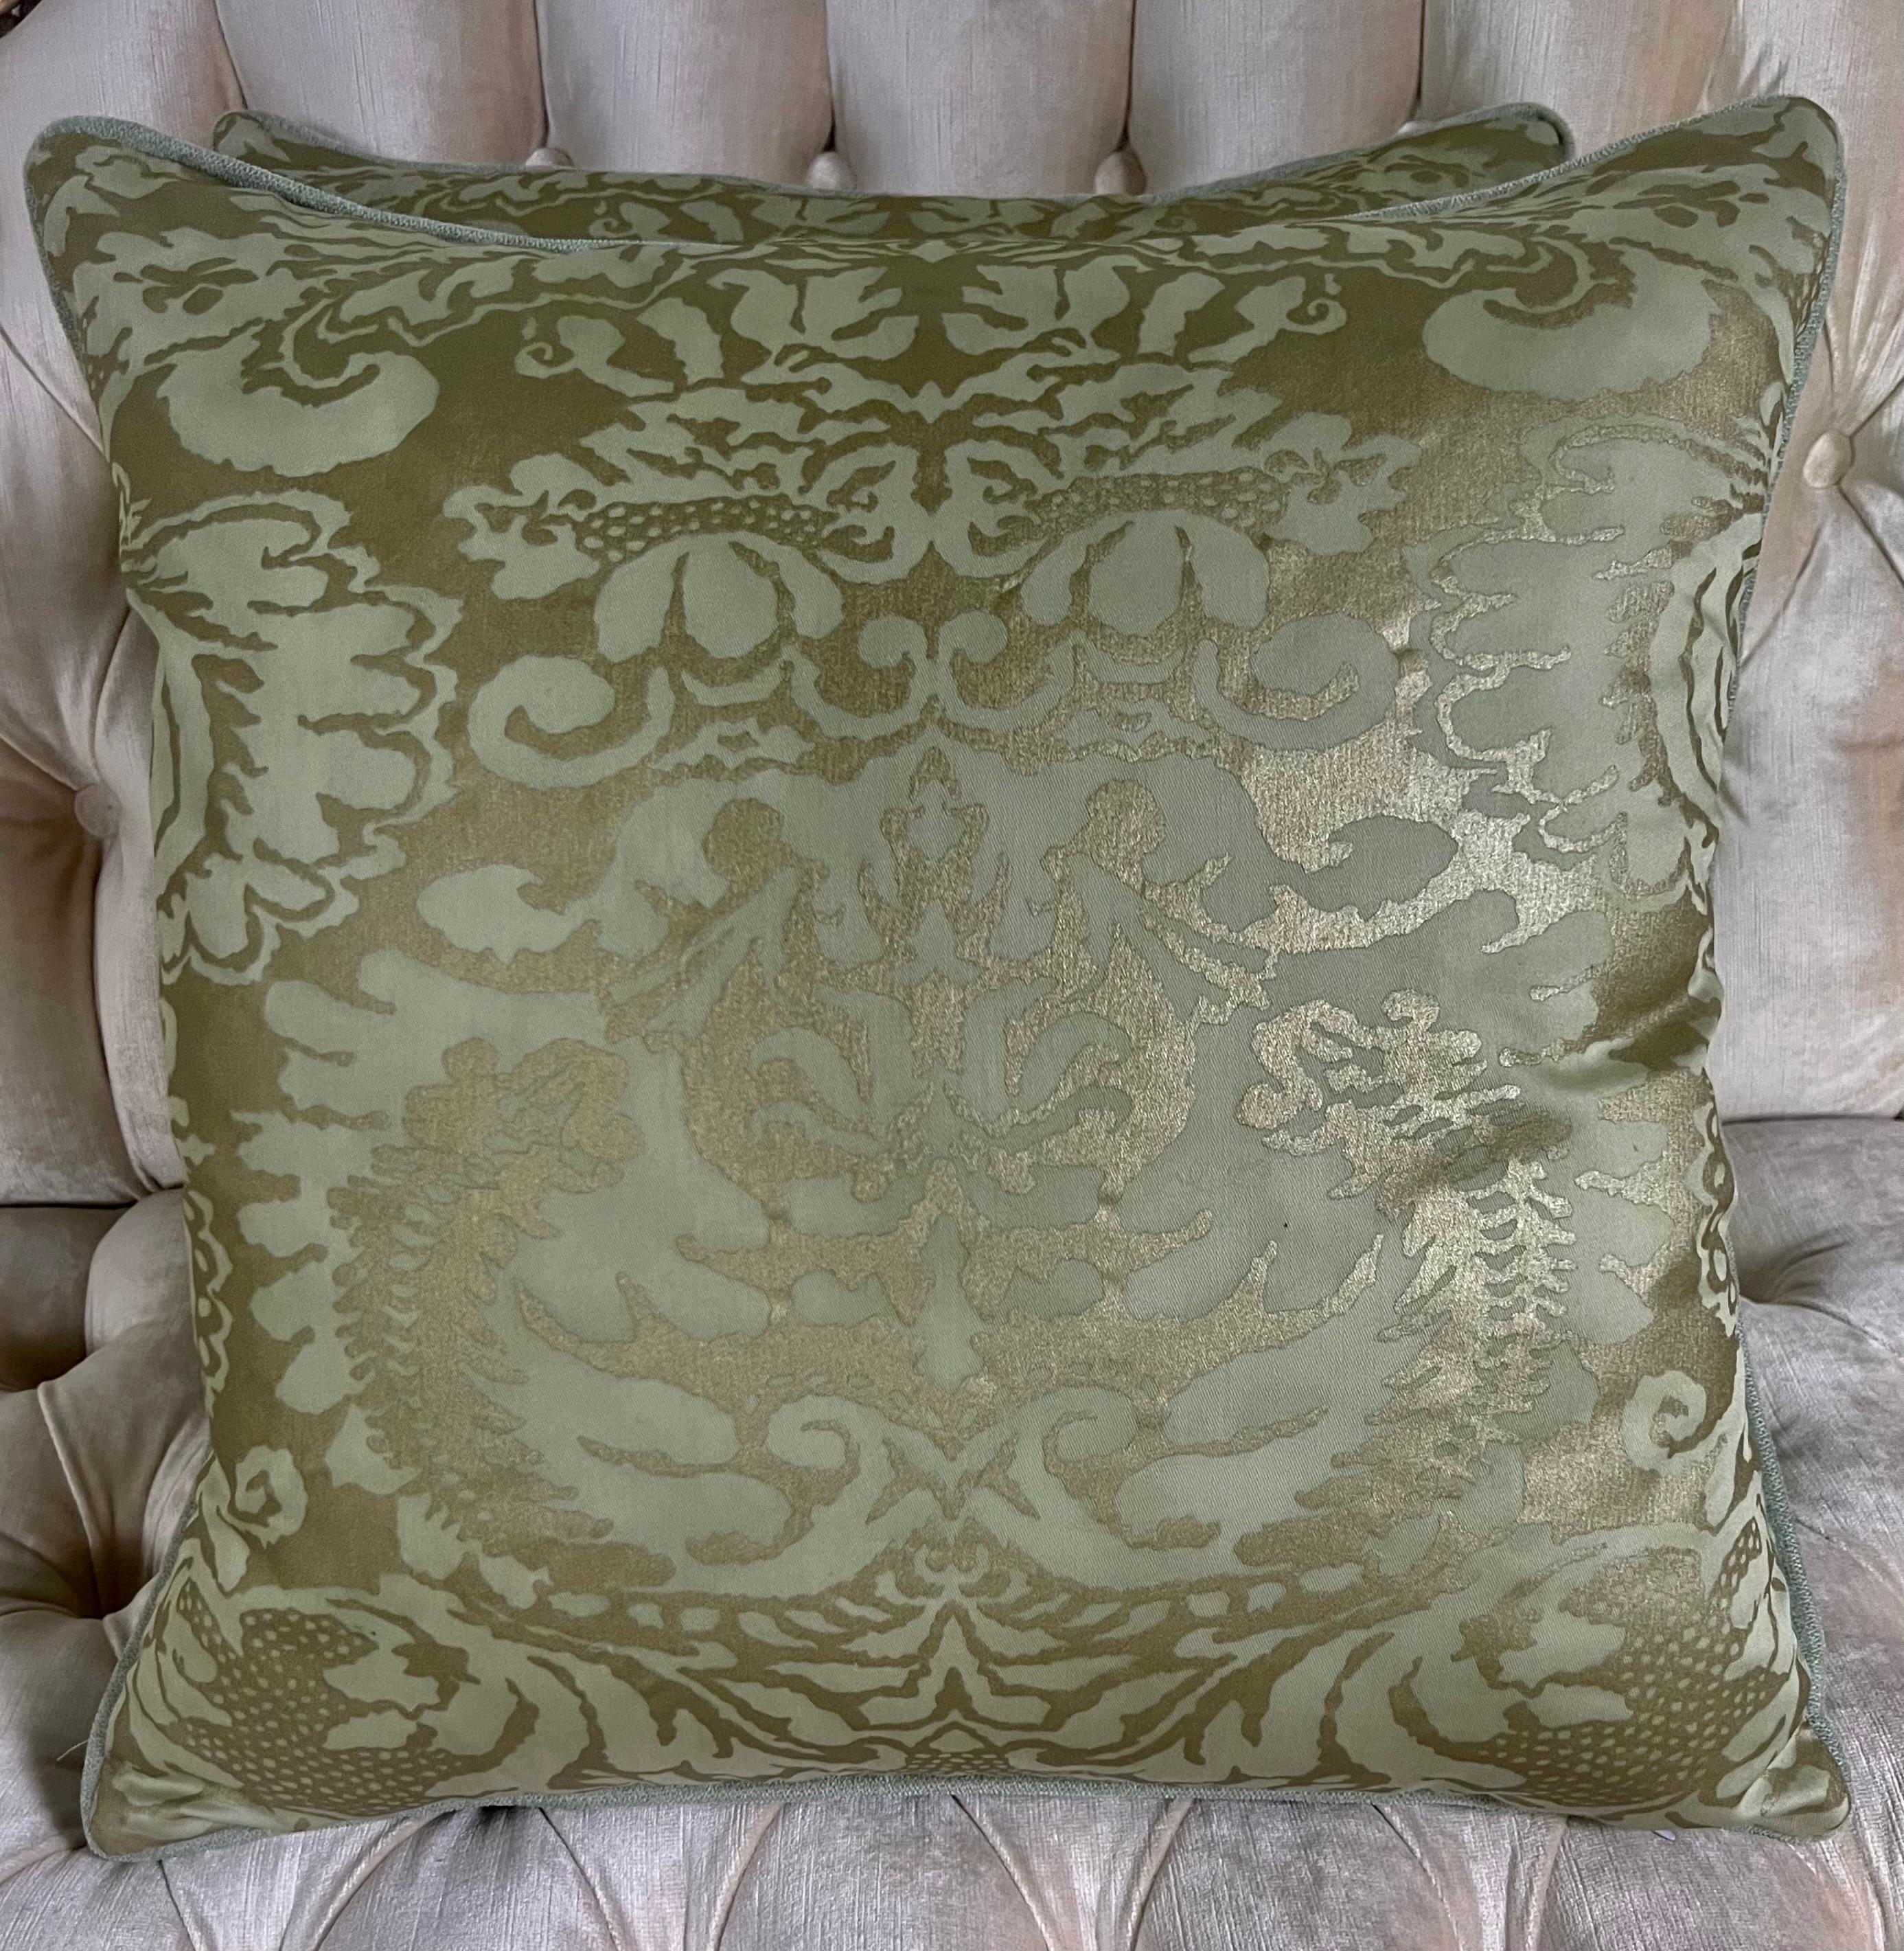 Pair of custom Fortuny style pillows in gold and soft green designed by Melissa Levinson.  The pillows have a coordinating velvet back and down fillings.  